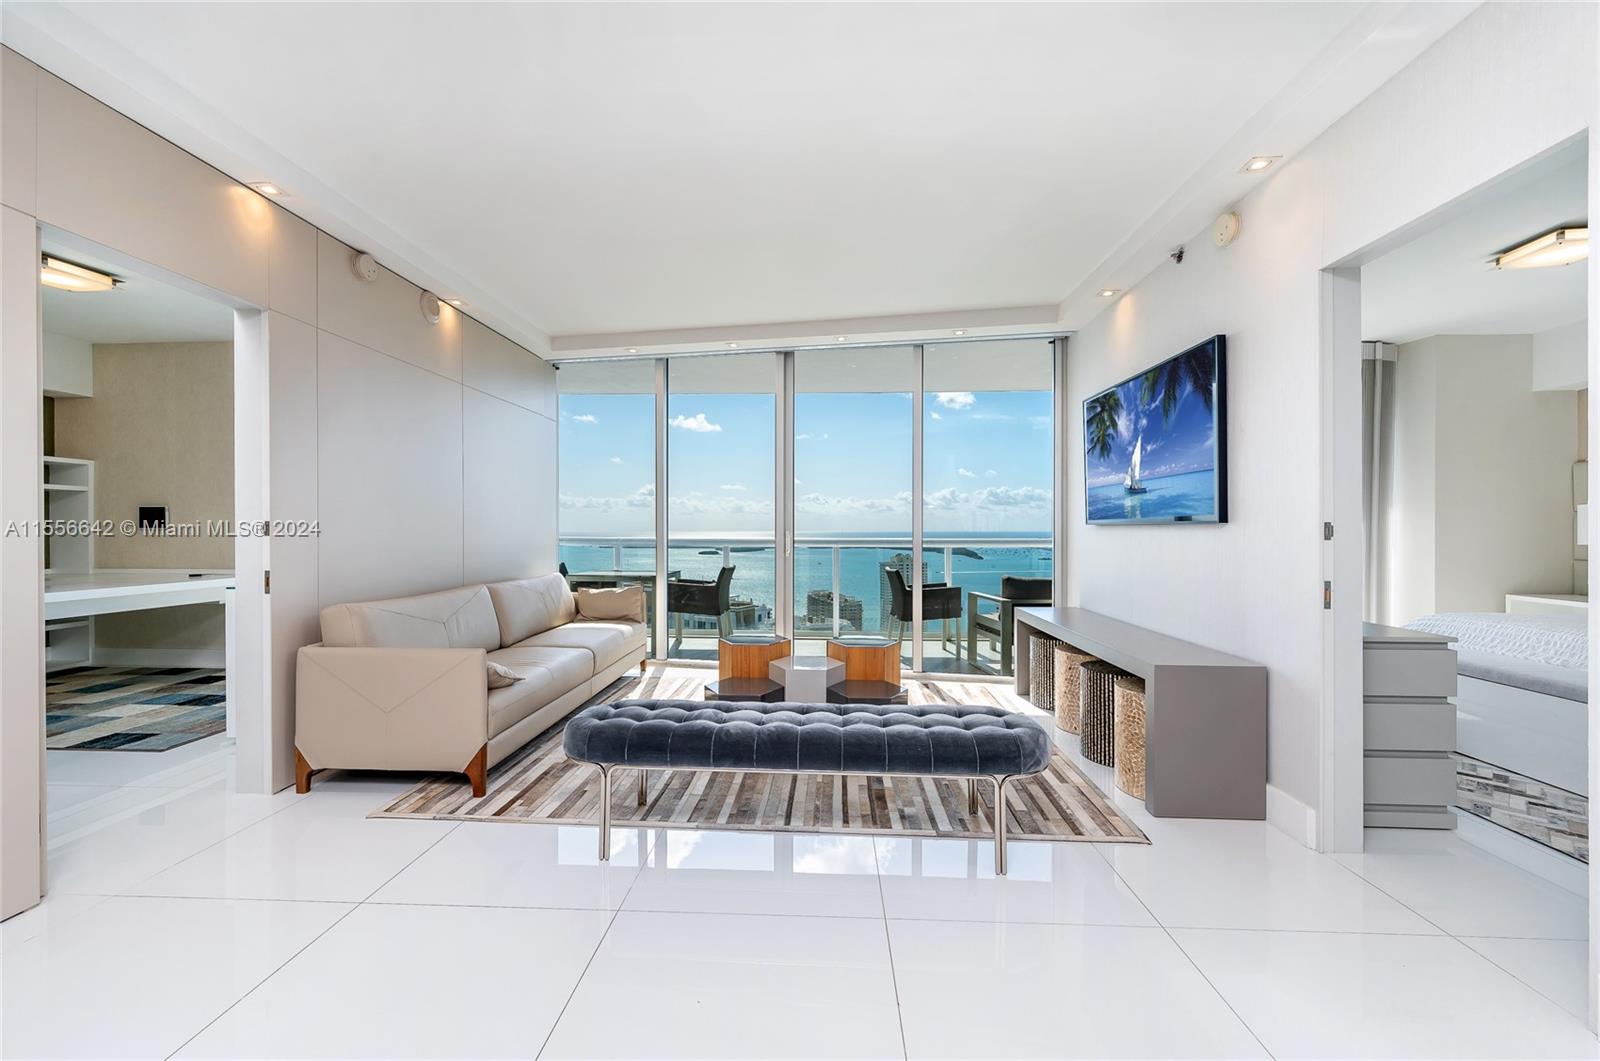 Welcome to the epitome of urban waterfront luxury living at Icon Brickell, where sophistication meets convenience. This stunning 2-bedroom, 2-bathroom, complete with a den,
offers captivating direct Biscayne Bay views and boasts gorgeous sunrise vistas. Meticulously updated throughout, this unit exemplifies modern luxury and convenience. With a turn- key. fully furnished design, it offer a seamless transition into you new home. Situated directly on the water. steps from world-class restaurants & vibrant Brickell living. 5- star amenities include fitness center, spa, pools, valet, & more. Don't miss your chance to own a piece of waterfront paradise in one of the most sought-after locations,.